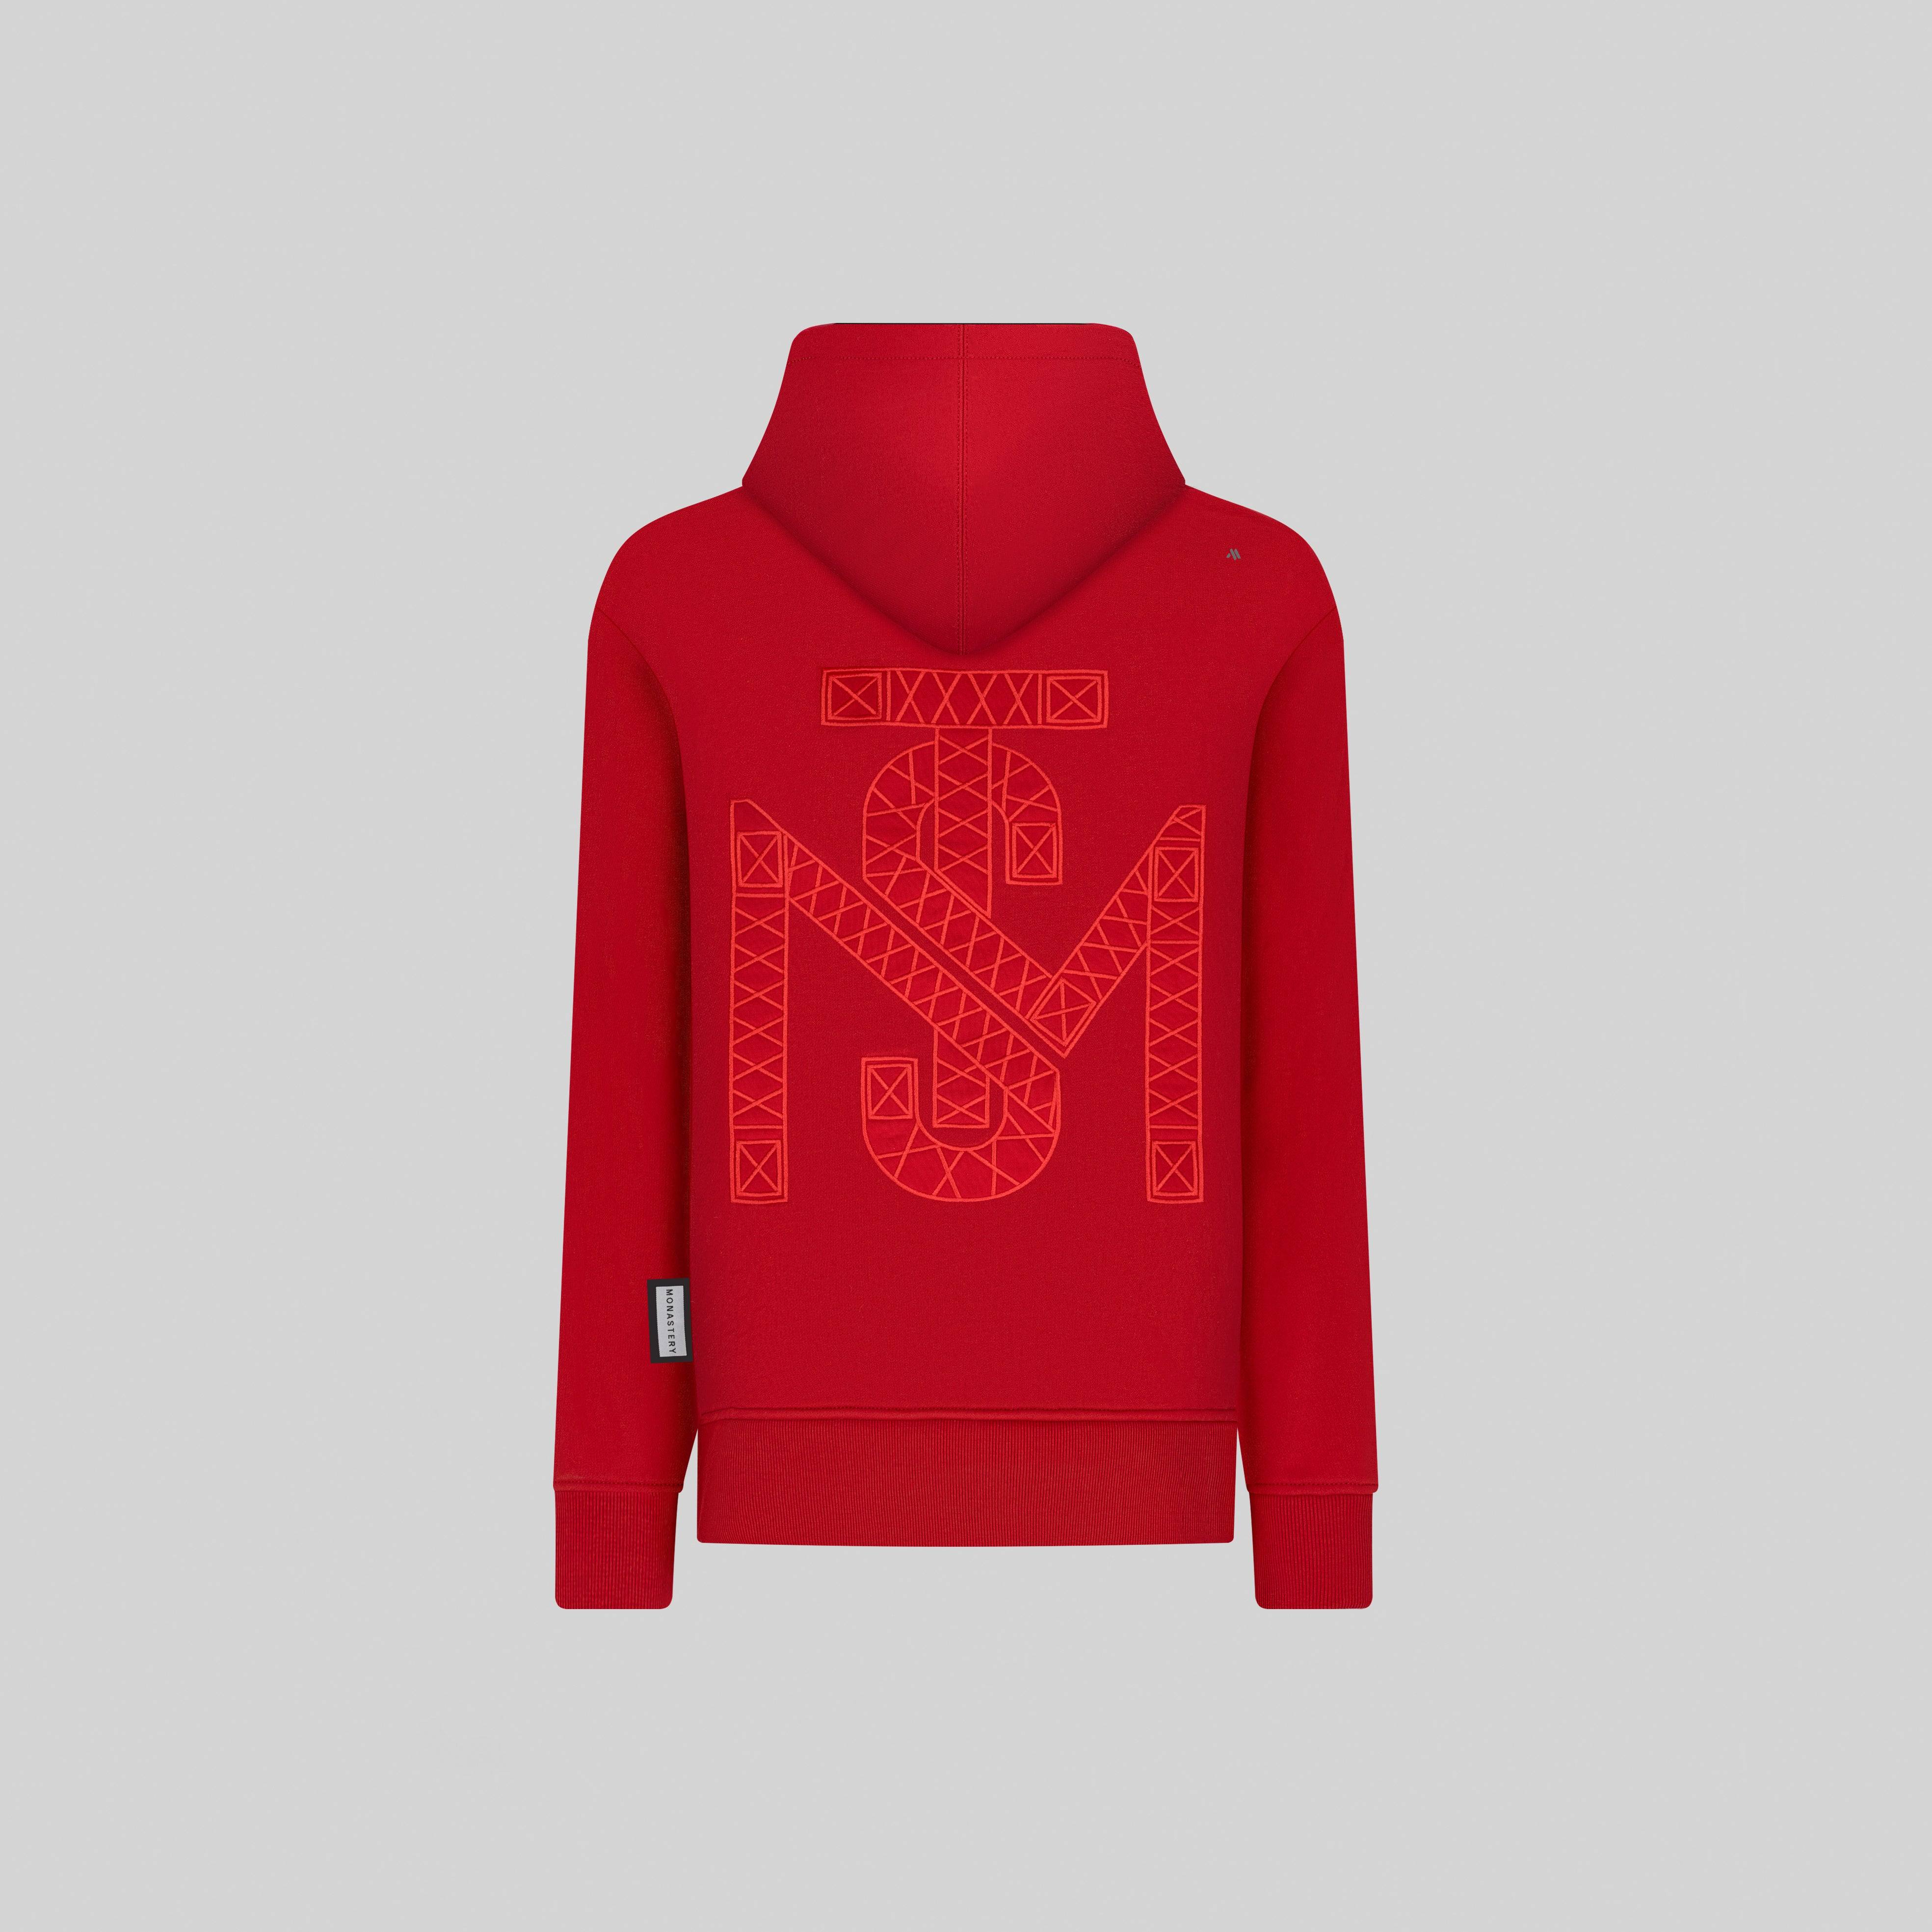 CASANDRO RED HOODIE | Monastery Couture